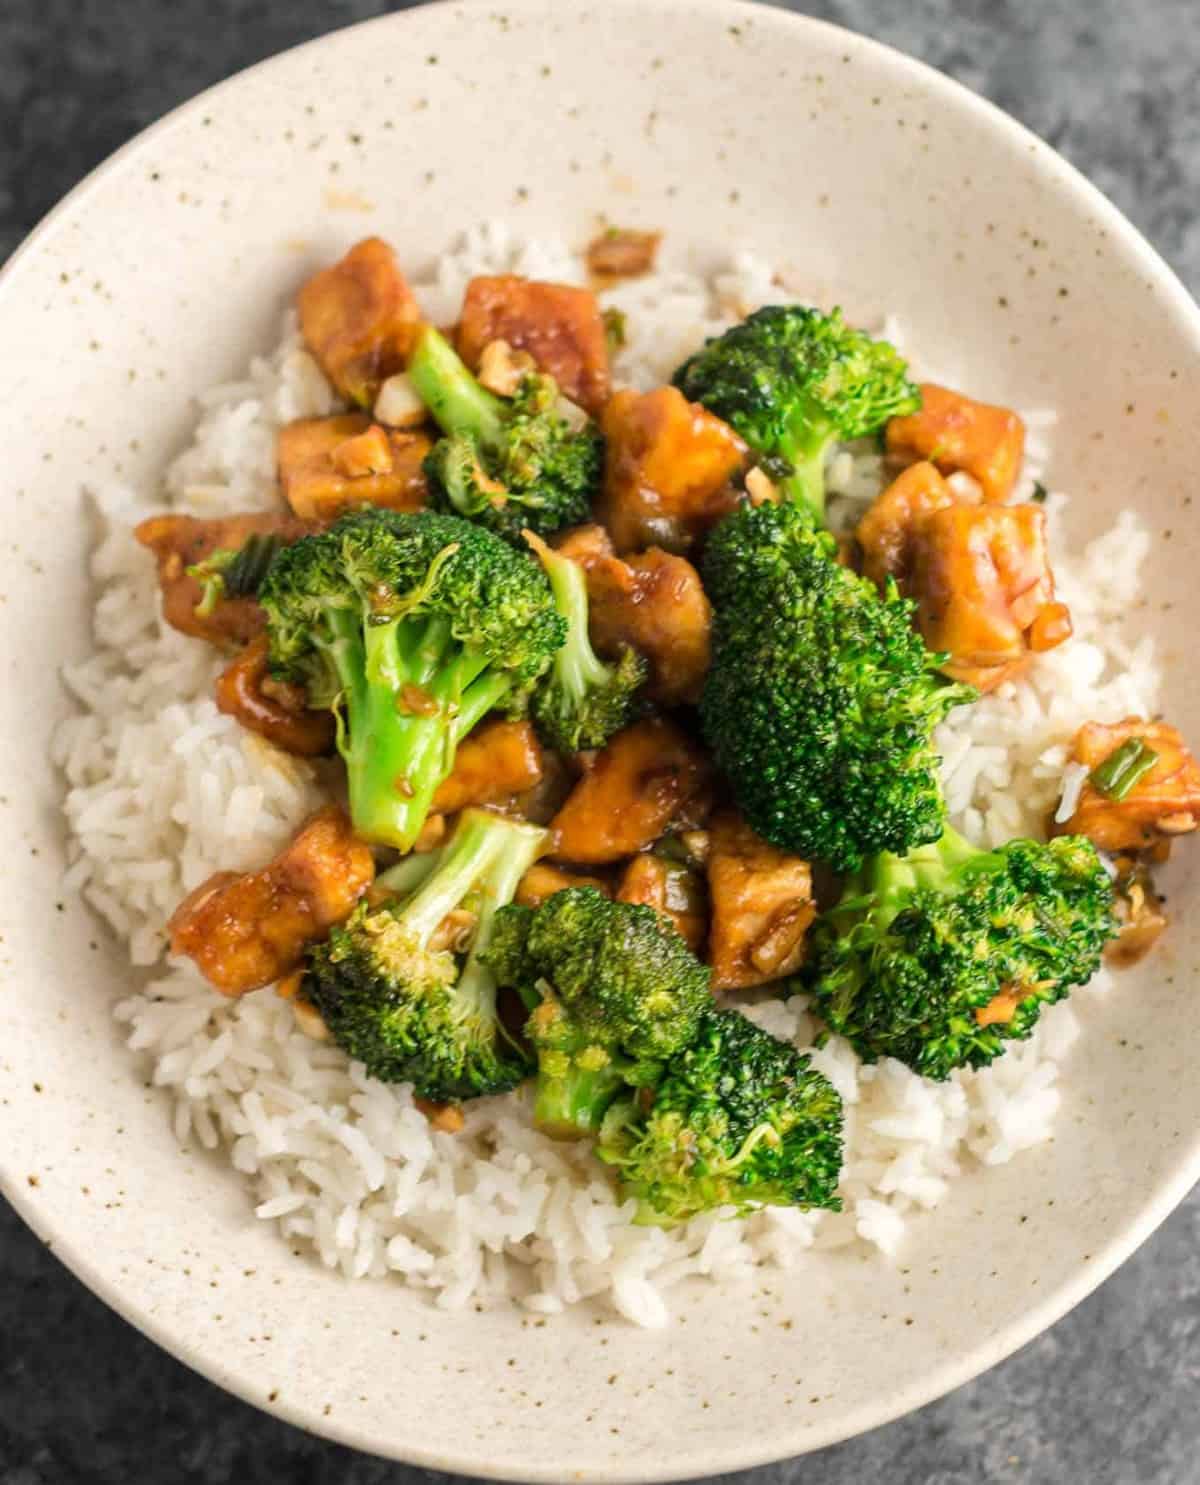 broccoli and tofu stir fry over rice in a bowl